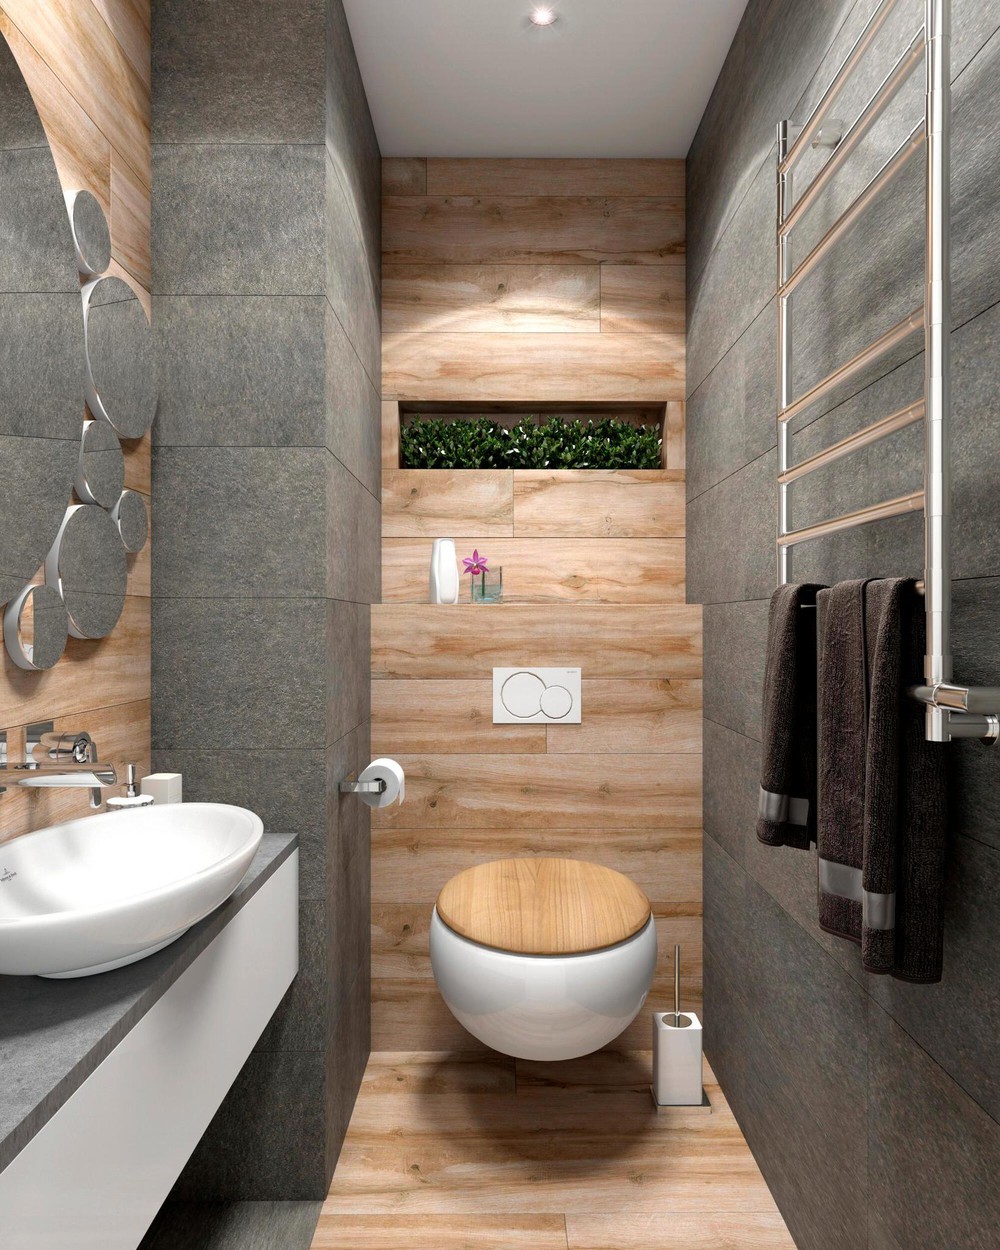 gray contemporary wooden bathroom "width =" 1000 "height =" 1250 "srcset =" https://mileray.com/wp-content/uploads/2020/05/1588516295_370_Contemporary-Bathroom-Decor-Ideas-Combined-With-Wooden-Accents-Become-a.jpg 1000w, https://mileray.com / wp-content / uploads / 2016/09 / Olya-Berkova-240x300.jpg 240w, https://mileray.com/wp-content/uploads/2016/09/Olya-Berkova-768x960.jpg 768w, https: / / mileray.com/wp-content/uploads/2016/09/Olya-Berkova-819x1024.jpg 819w, https://mileray.com/wp-content/uploads/2016/09/Olya-Berkova-696x870.jpg 696w, https://mileray.com/wp-content/uploads/2016/09/Olya-Berkova-336x420.jpg 336w "sizes =" (maximum width: 1000px) 100vw, 1000px